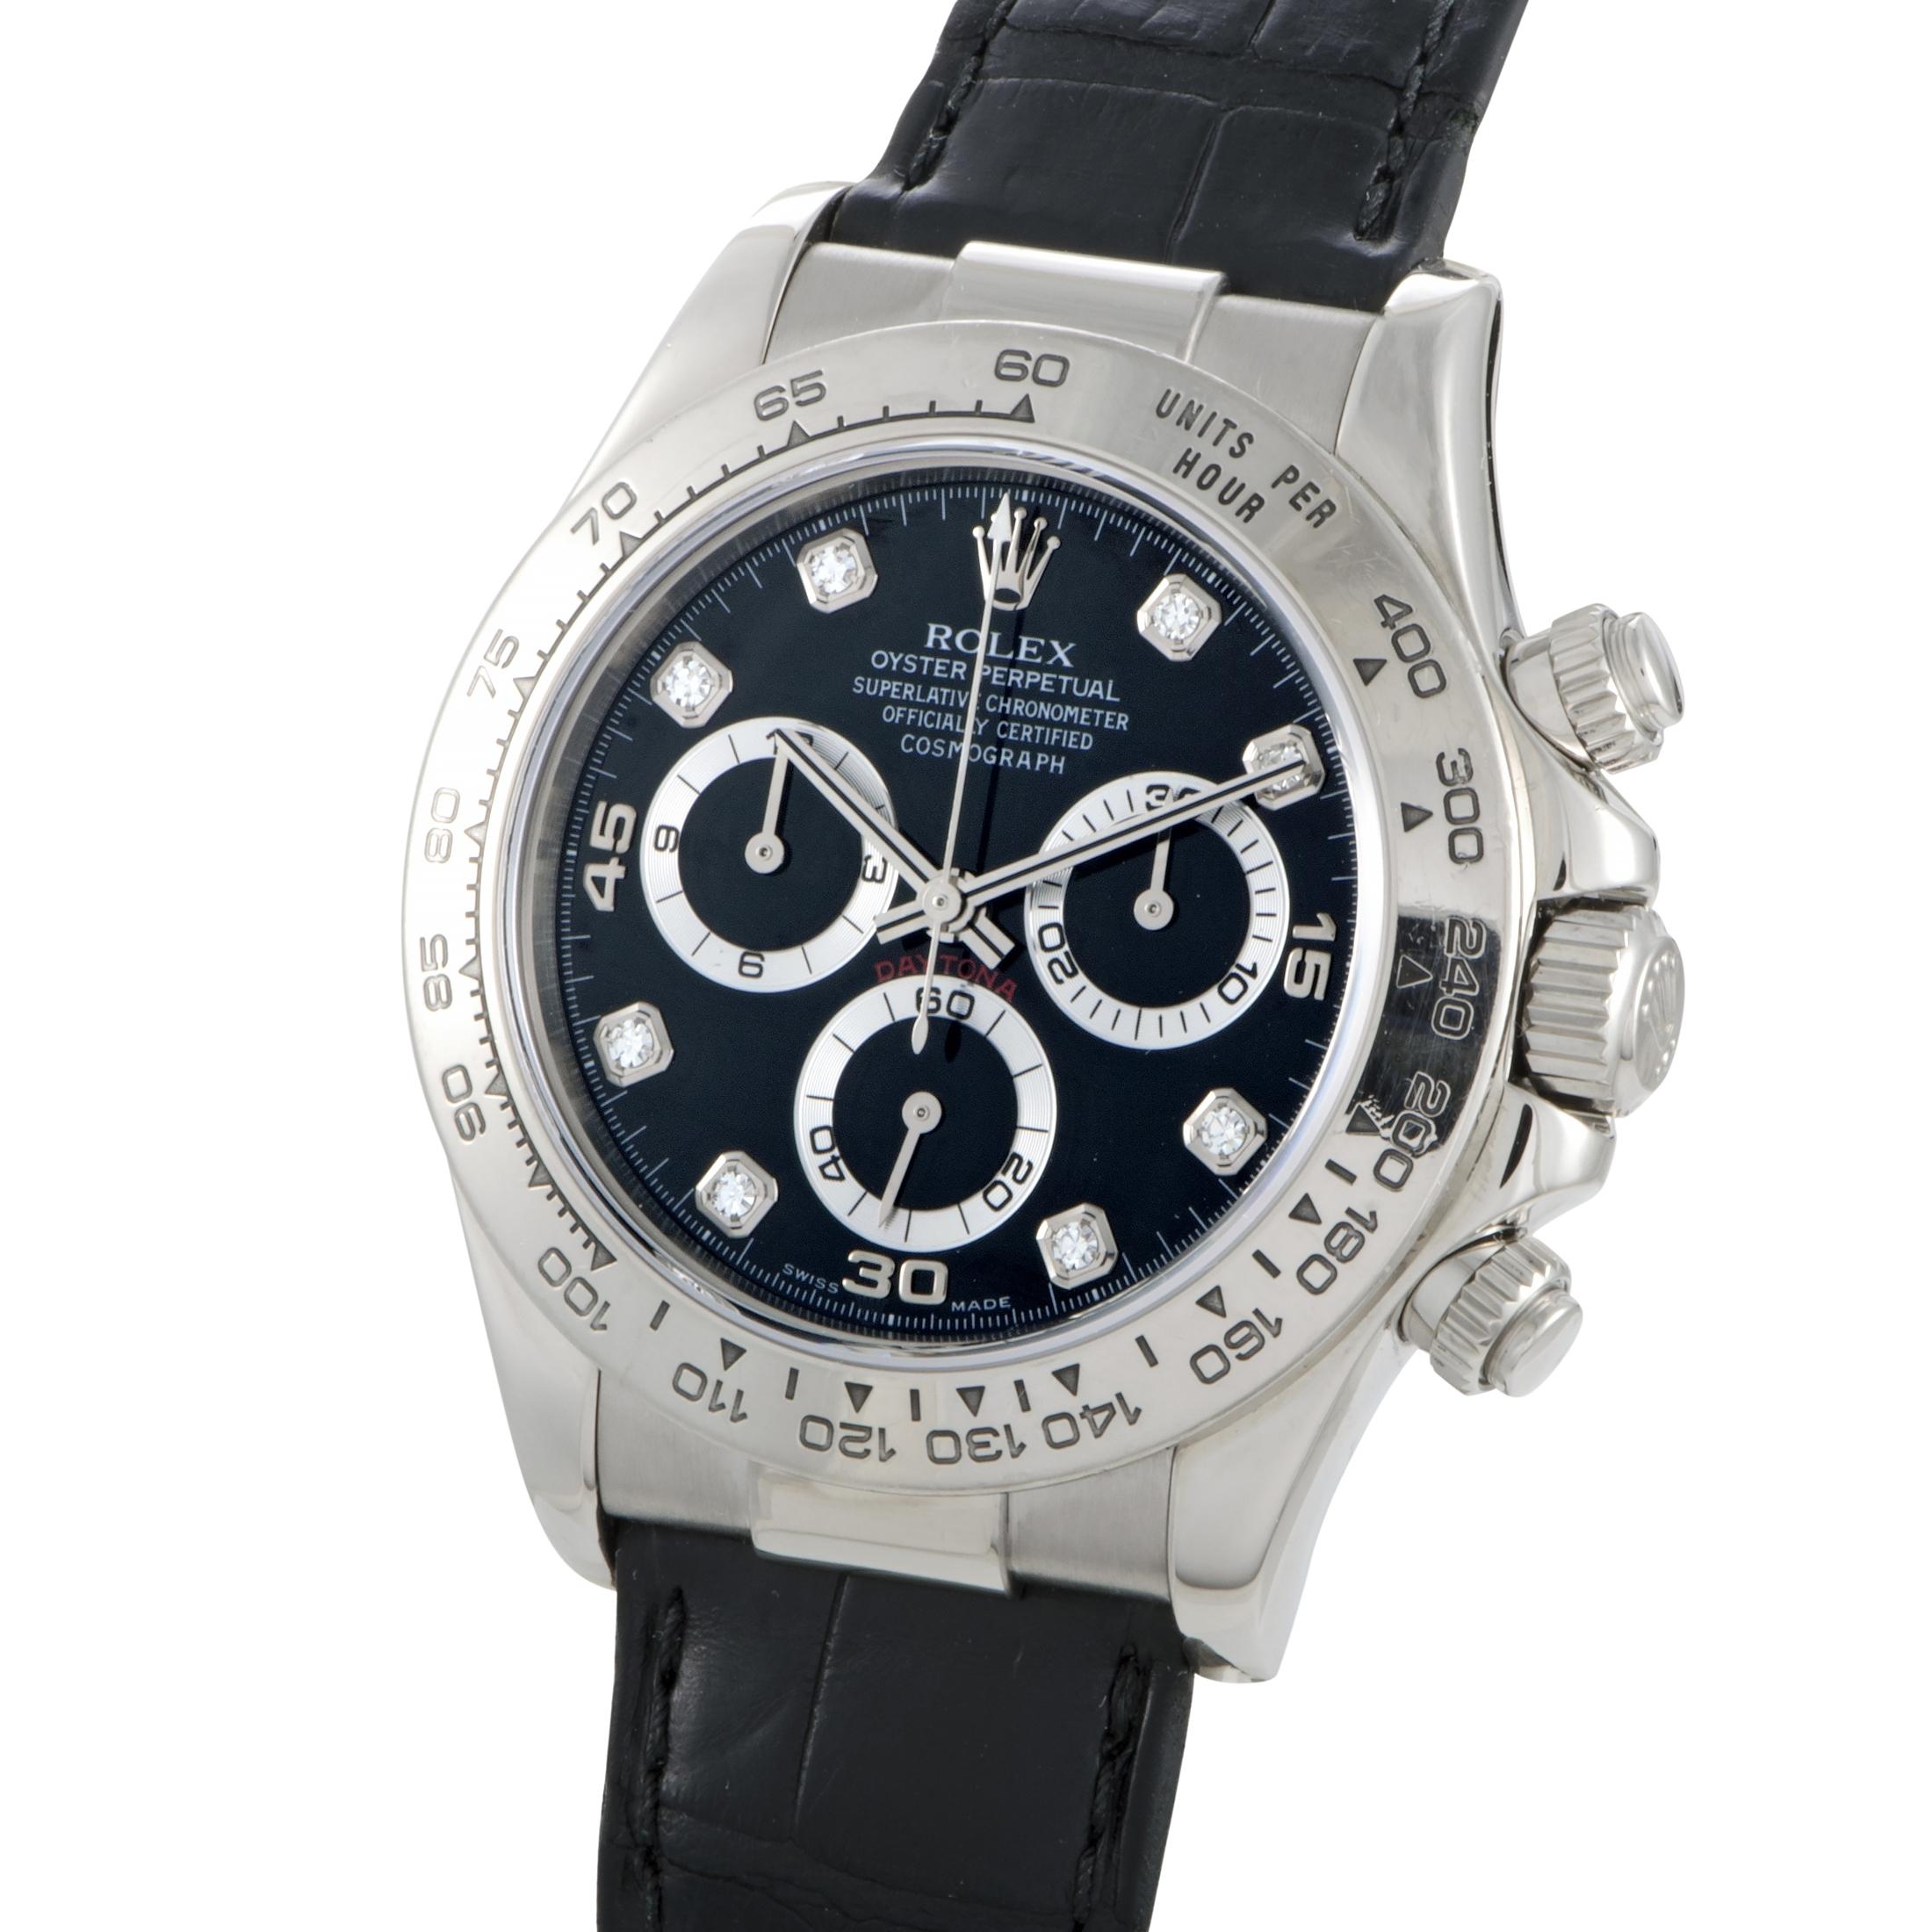 A resolutely sporty and technically sophisticated expression of the brand’s highly revered style of uncompromising excellence and aesthetic refinement, this sublime timepiece from Rolex ensures an astonishing level of reliability and comfort in an